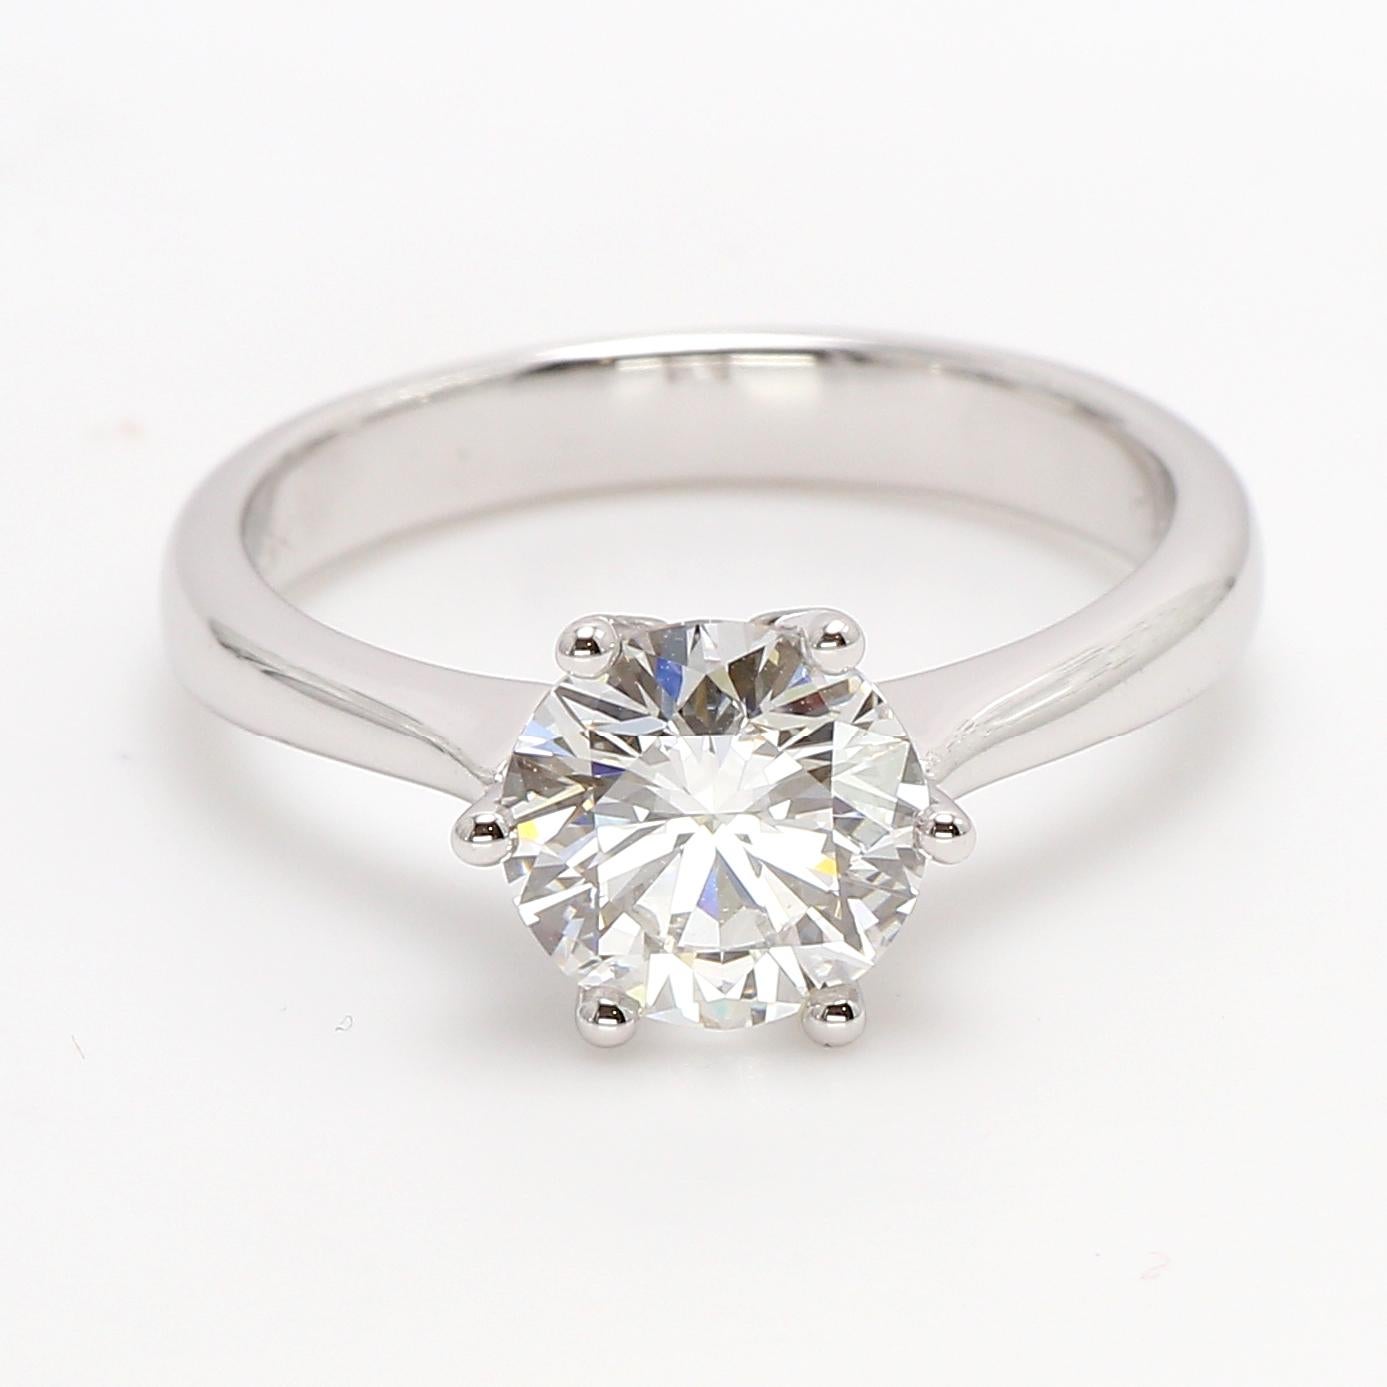 Beautifully crafted 18 Karat White Gold Solitaire Engagement Ring.
Round Brilliant Cut Shimansky White diamond 1.568ct  E color and VS1 clarity.
6 Prong Solitaire. EGL South Africa Certified Diamonds
Ring Size 6 (USA) can be sized 2 up or down and